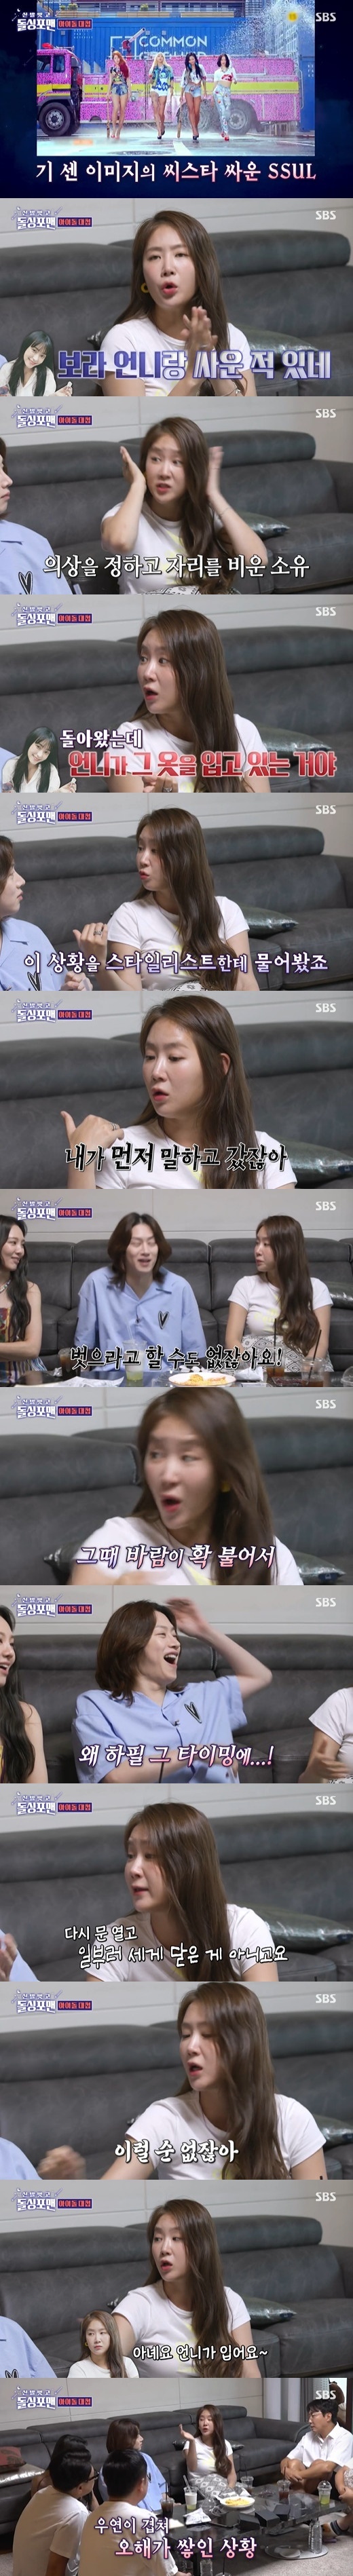 In Take off your shoes and dolsing foreman, singer Soyou recalled the time of the group Sistar activity.On SBS Take off your shoes and dolsing foreman, which was broadcast on the afternoon of the 5th, veteran Idols such as Kim Hee-chul (Super Junior), 16-year-old Hyo-yeon (Girls Generation), and 13-year-old Soyou appeared as guests.Soyou said, Our image was so strong early in our Sistar debut, there was a lot of rumors.I have never done that, but we went to a convenience store with full makeup and bought a tobacco. This was not the only absurd rumour surrounding Sistar: Soyou said: There were rumours that we were going to Western saloon, sitting men on both sides and drinking.This was the agencys tip. The company called to confirm, and we started to go out.I did not go out at all, and even if I drank alcohol, I only drank it in one place I knew at the company. Soyou also honestly answers the question Have you ever fought among members? He says, I think Ive fought Purple Sister.There was a situation where each other misunderstood each other. Before Purple Sister entered the waiting room, I picked the stage costume first.I went to the bathroom after modifying my hair to suit it, and Purple Sister was wearing what I chose.When I asked the stylist Sister, Purple said he was wearing it. I told you first, Purple Sister finally found out.But I cant tell Sister to take it off, and I was a little annoyed and tried to get out to get some air, but then the wind blew and the door hurt so hard.But I was in a bad mood at the time, so I opened the door again and told Sister, This is not because I tried to close it hard, but because of the wind. Soyou said: When I came back in, Purple Sister eventually said, No matter how hard you close the door, you wear this suit.So I told Sister that it was not the case that I closed the door hard earlier that it was not okay. We always solved it so quickly. 